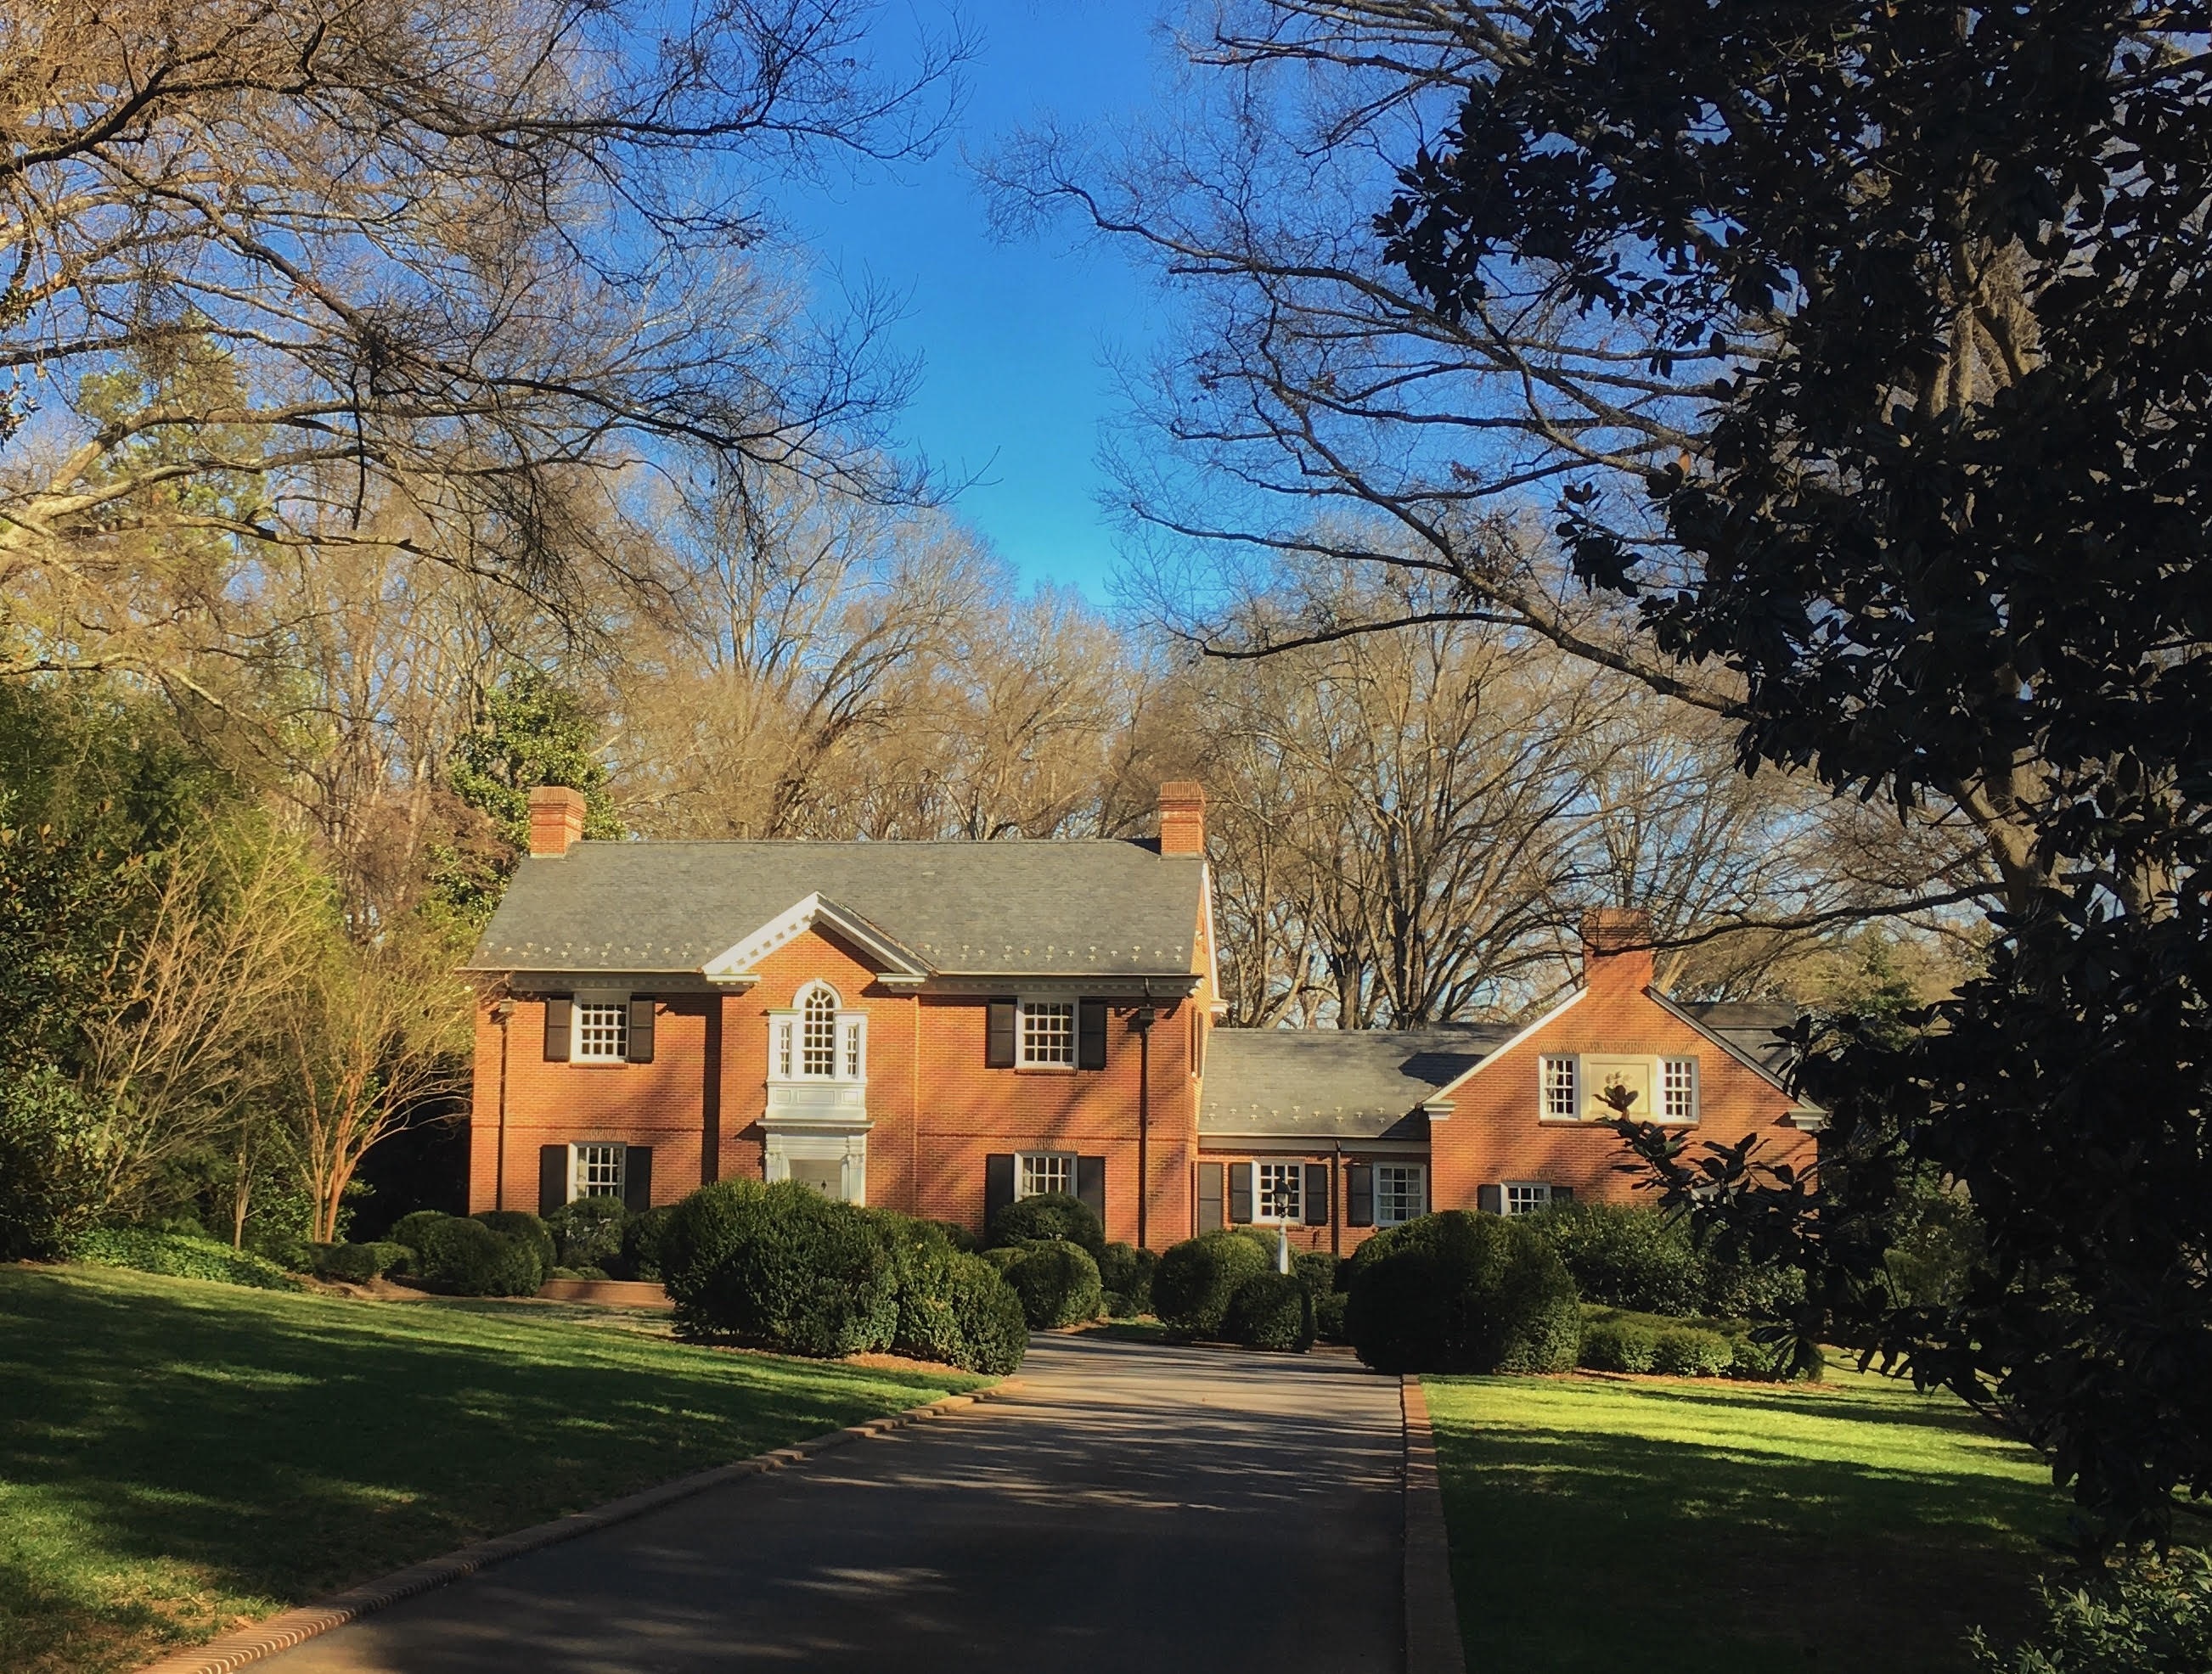 Pictured Hempstead Place listed for $3,600,000.00 placed under contract by Matthew Paul Brown of Reside Charlotte Group, Ivester Jackson |Christie’s International Real Estate